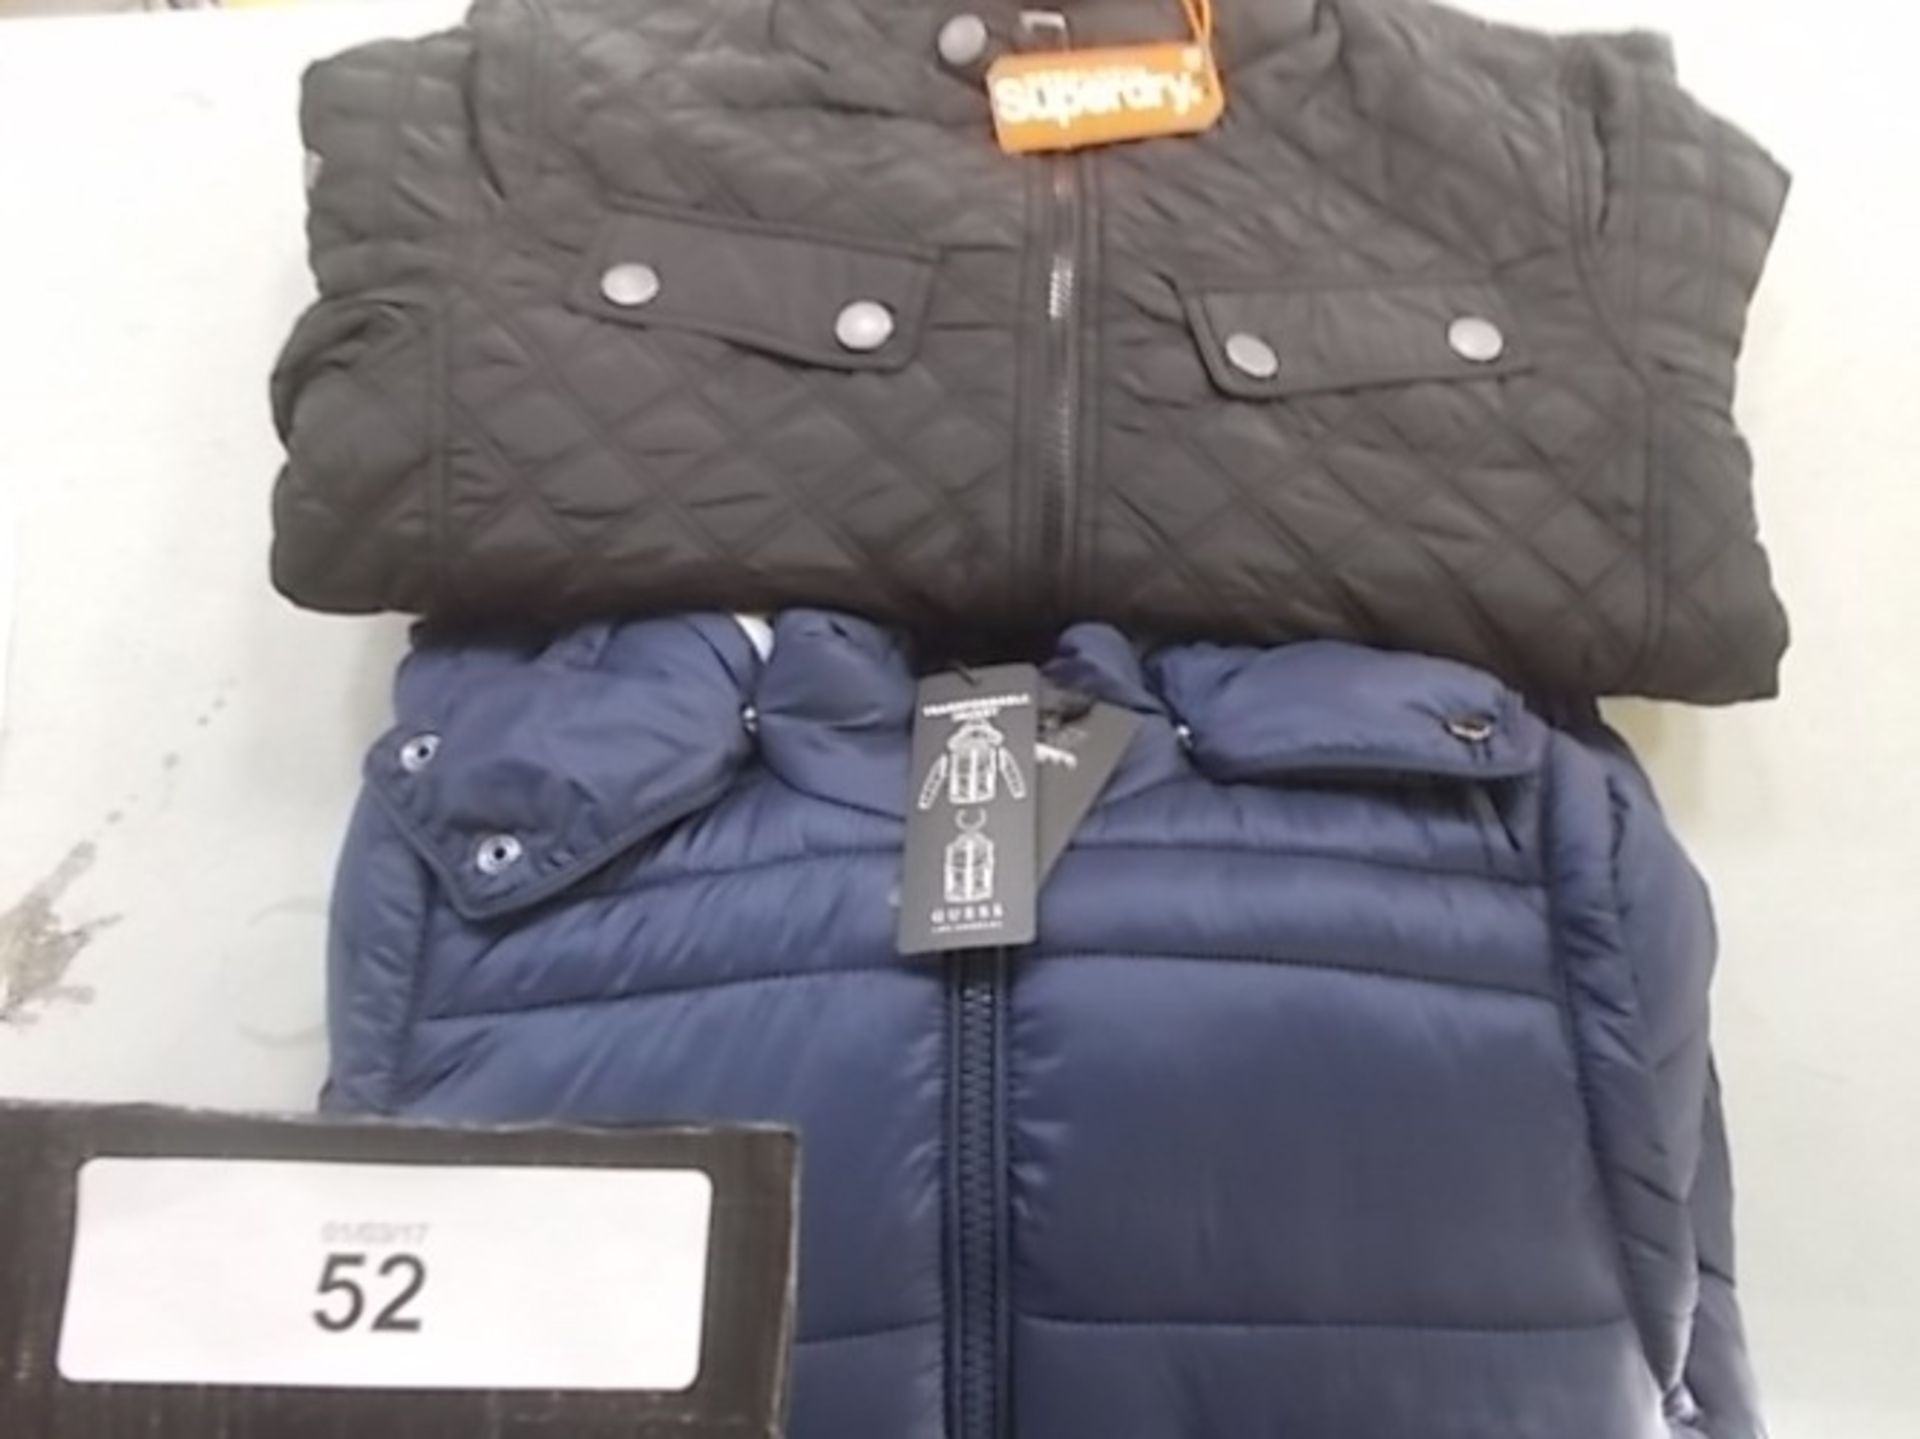 1 x men's branded coats/jackets comprising Superdry Apex Norse Jacket quilted black jacket, size ~